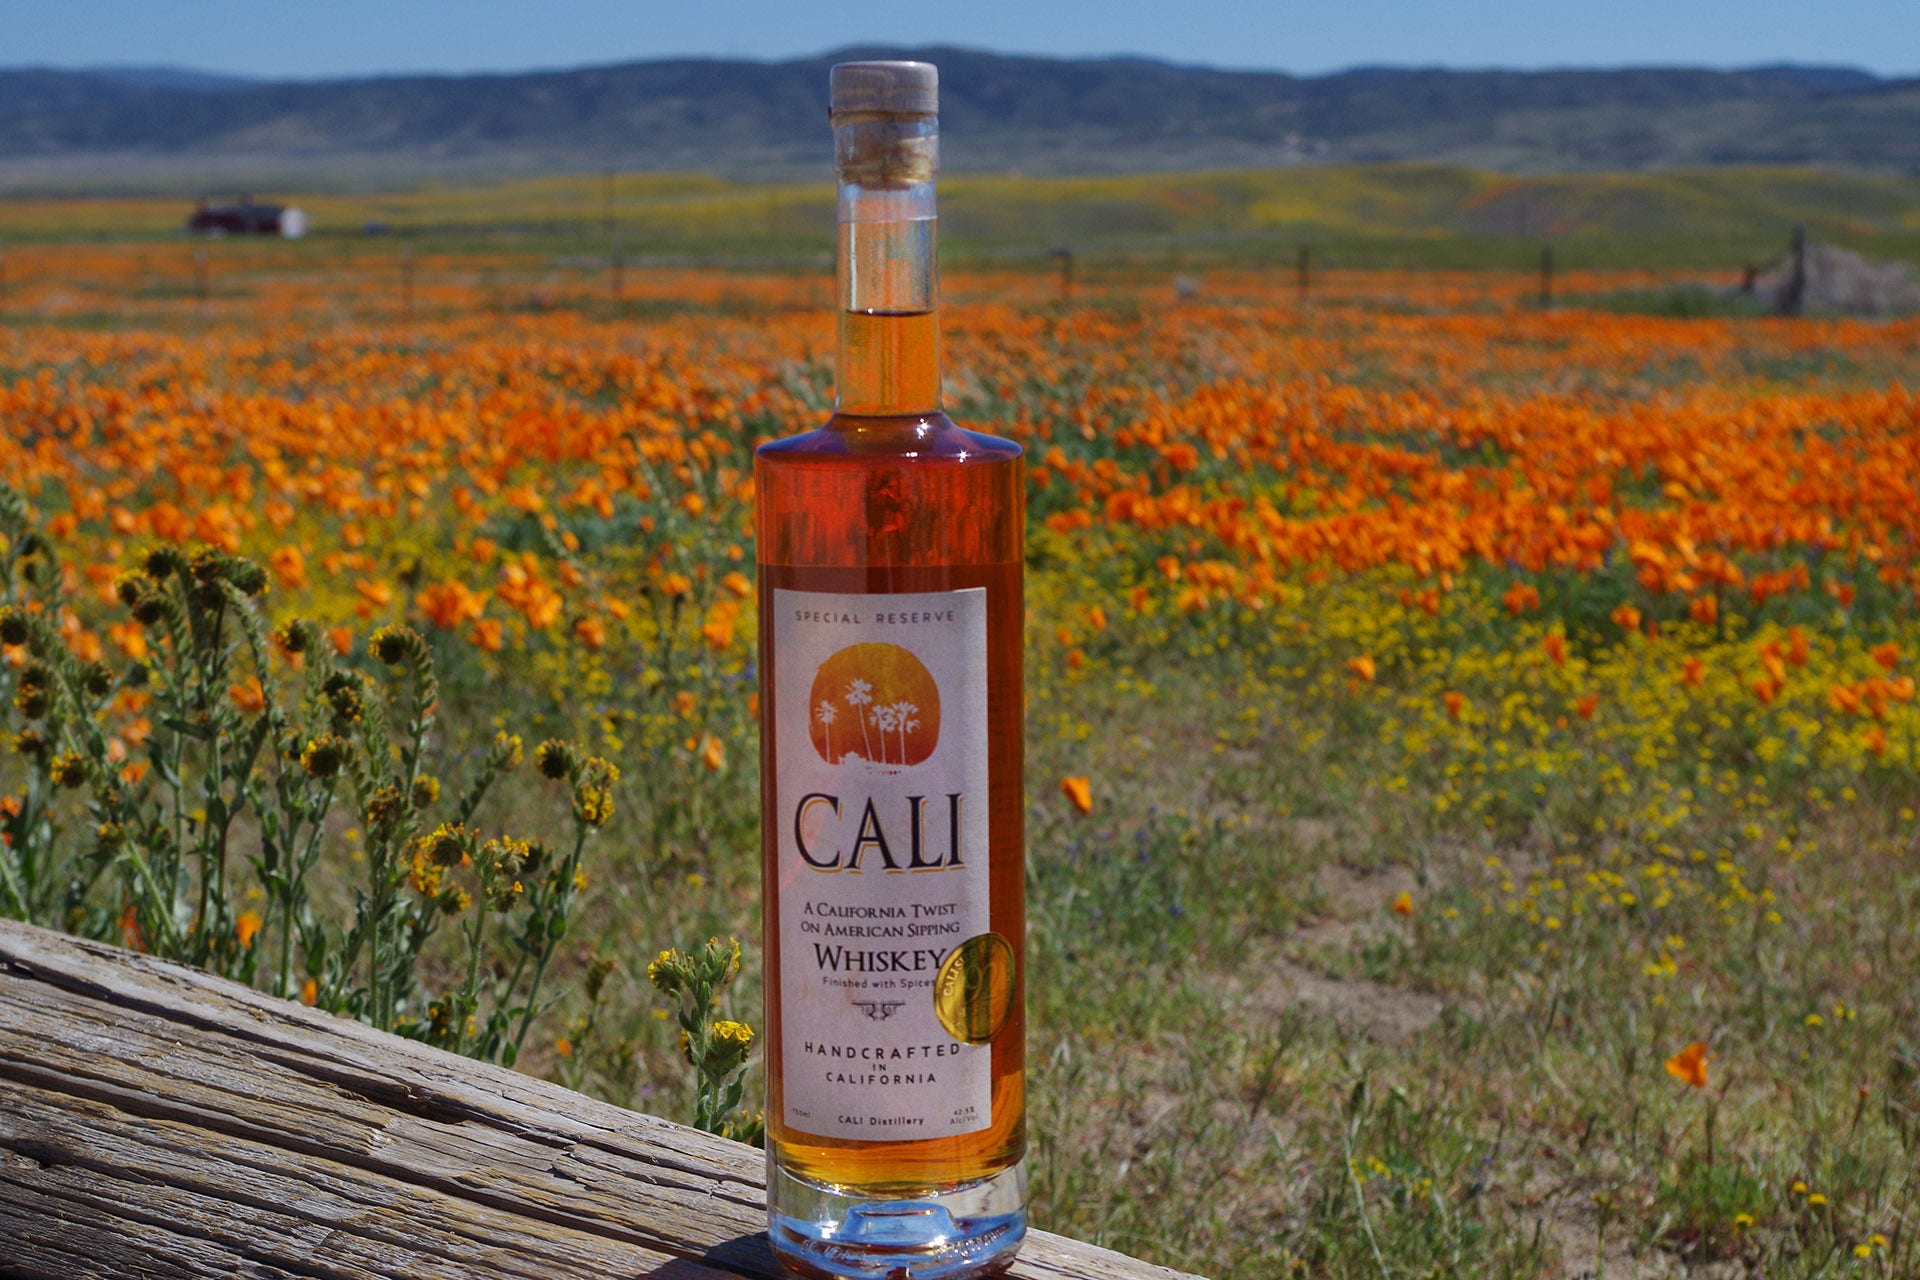 A slim bottle of whiskey in front of a field of bloomming poppies